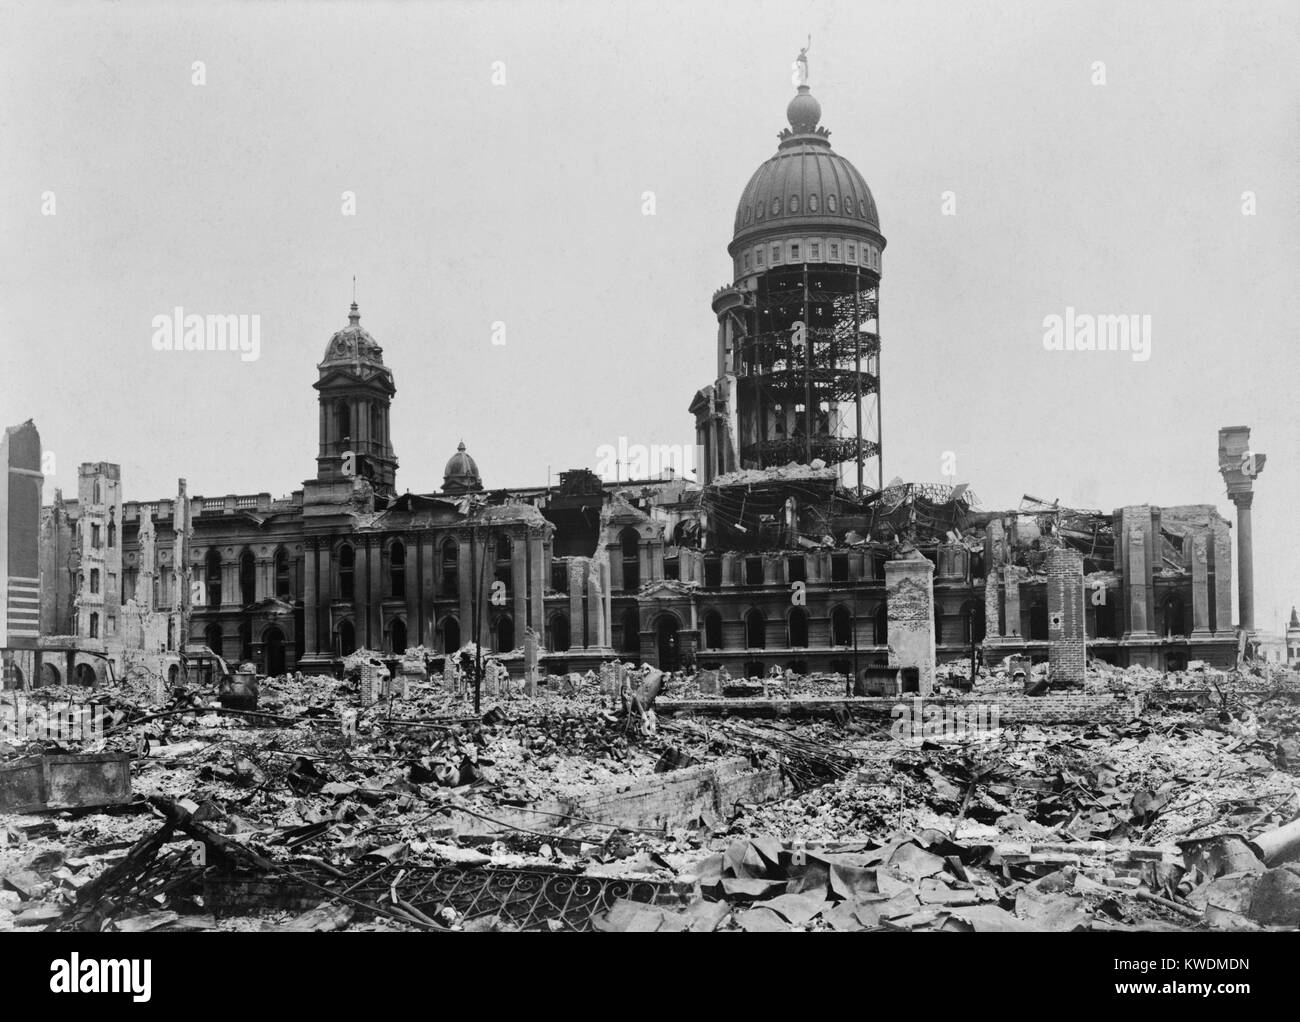 Ruins of San Francisco City Hall after the April 18, 1906 earthquake and 3-day fire. In 1899, it was opened after a scandal about its 27 years of construction at a cost of $6 million. It was completely destroyed and replaced by a new building built at a different site (BSLOC 2017 17 26) Stock Photo